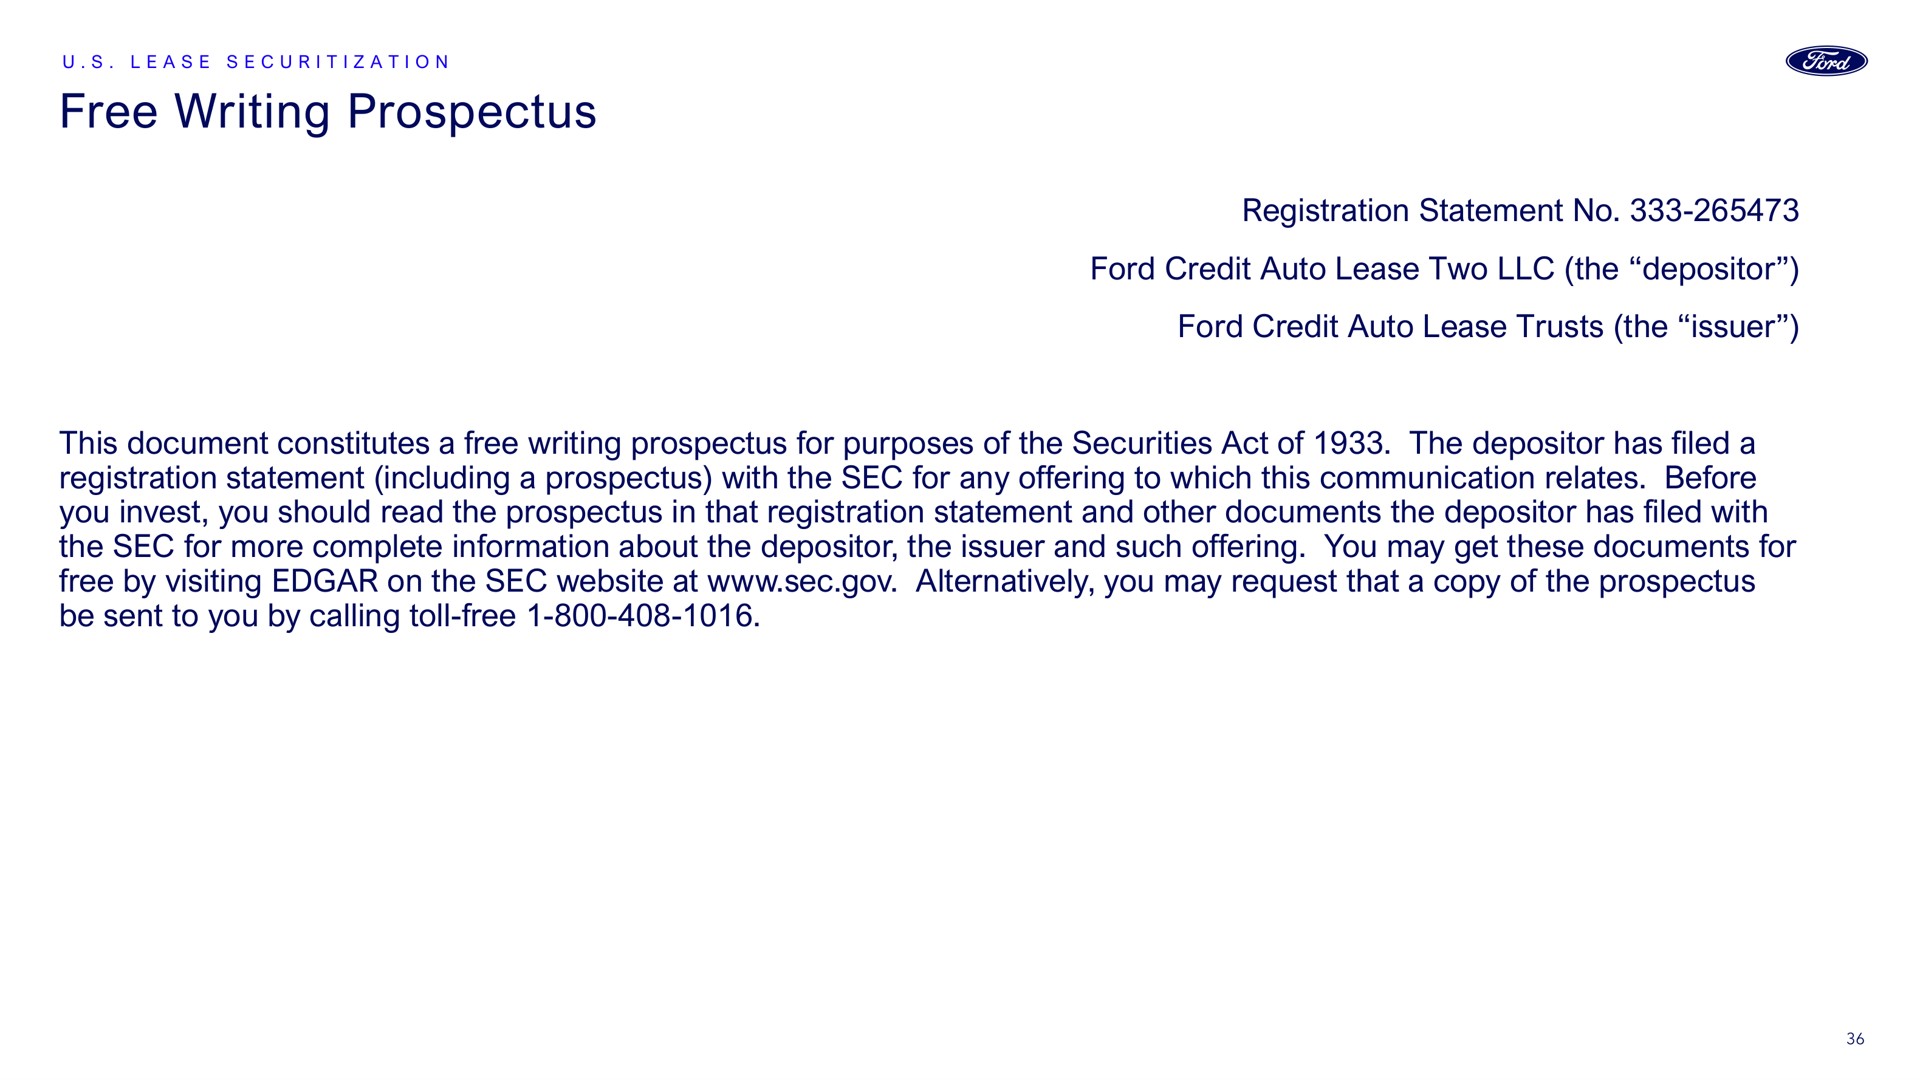 free writing prospectus | Ford